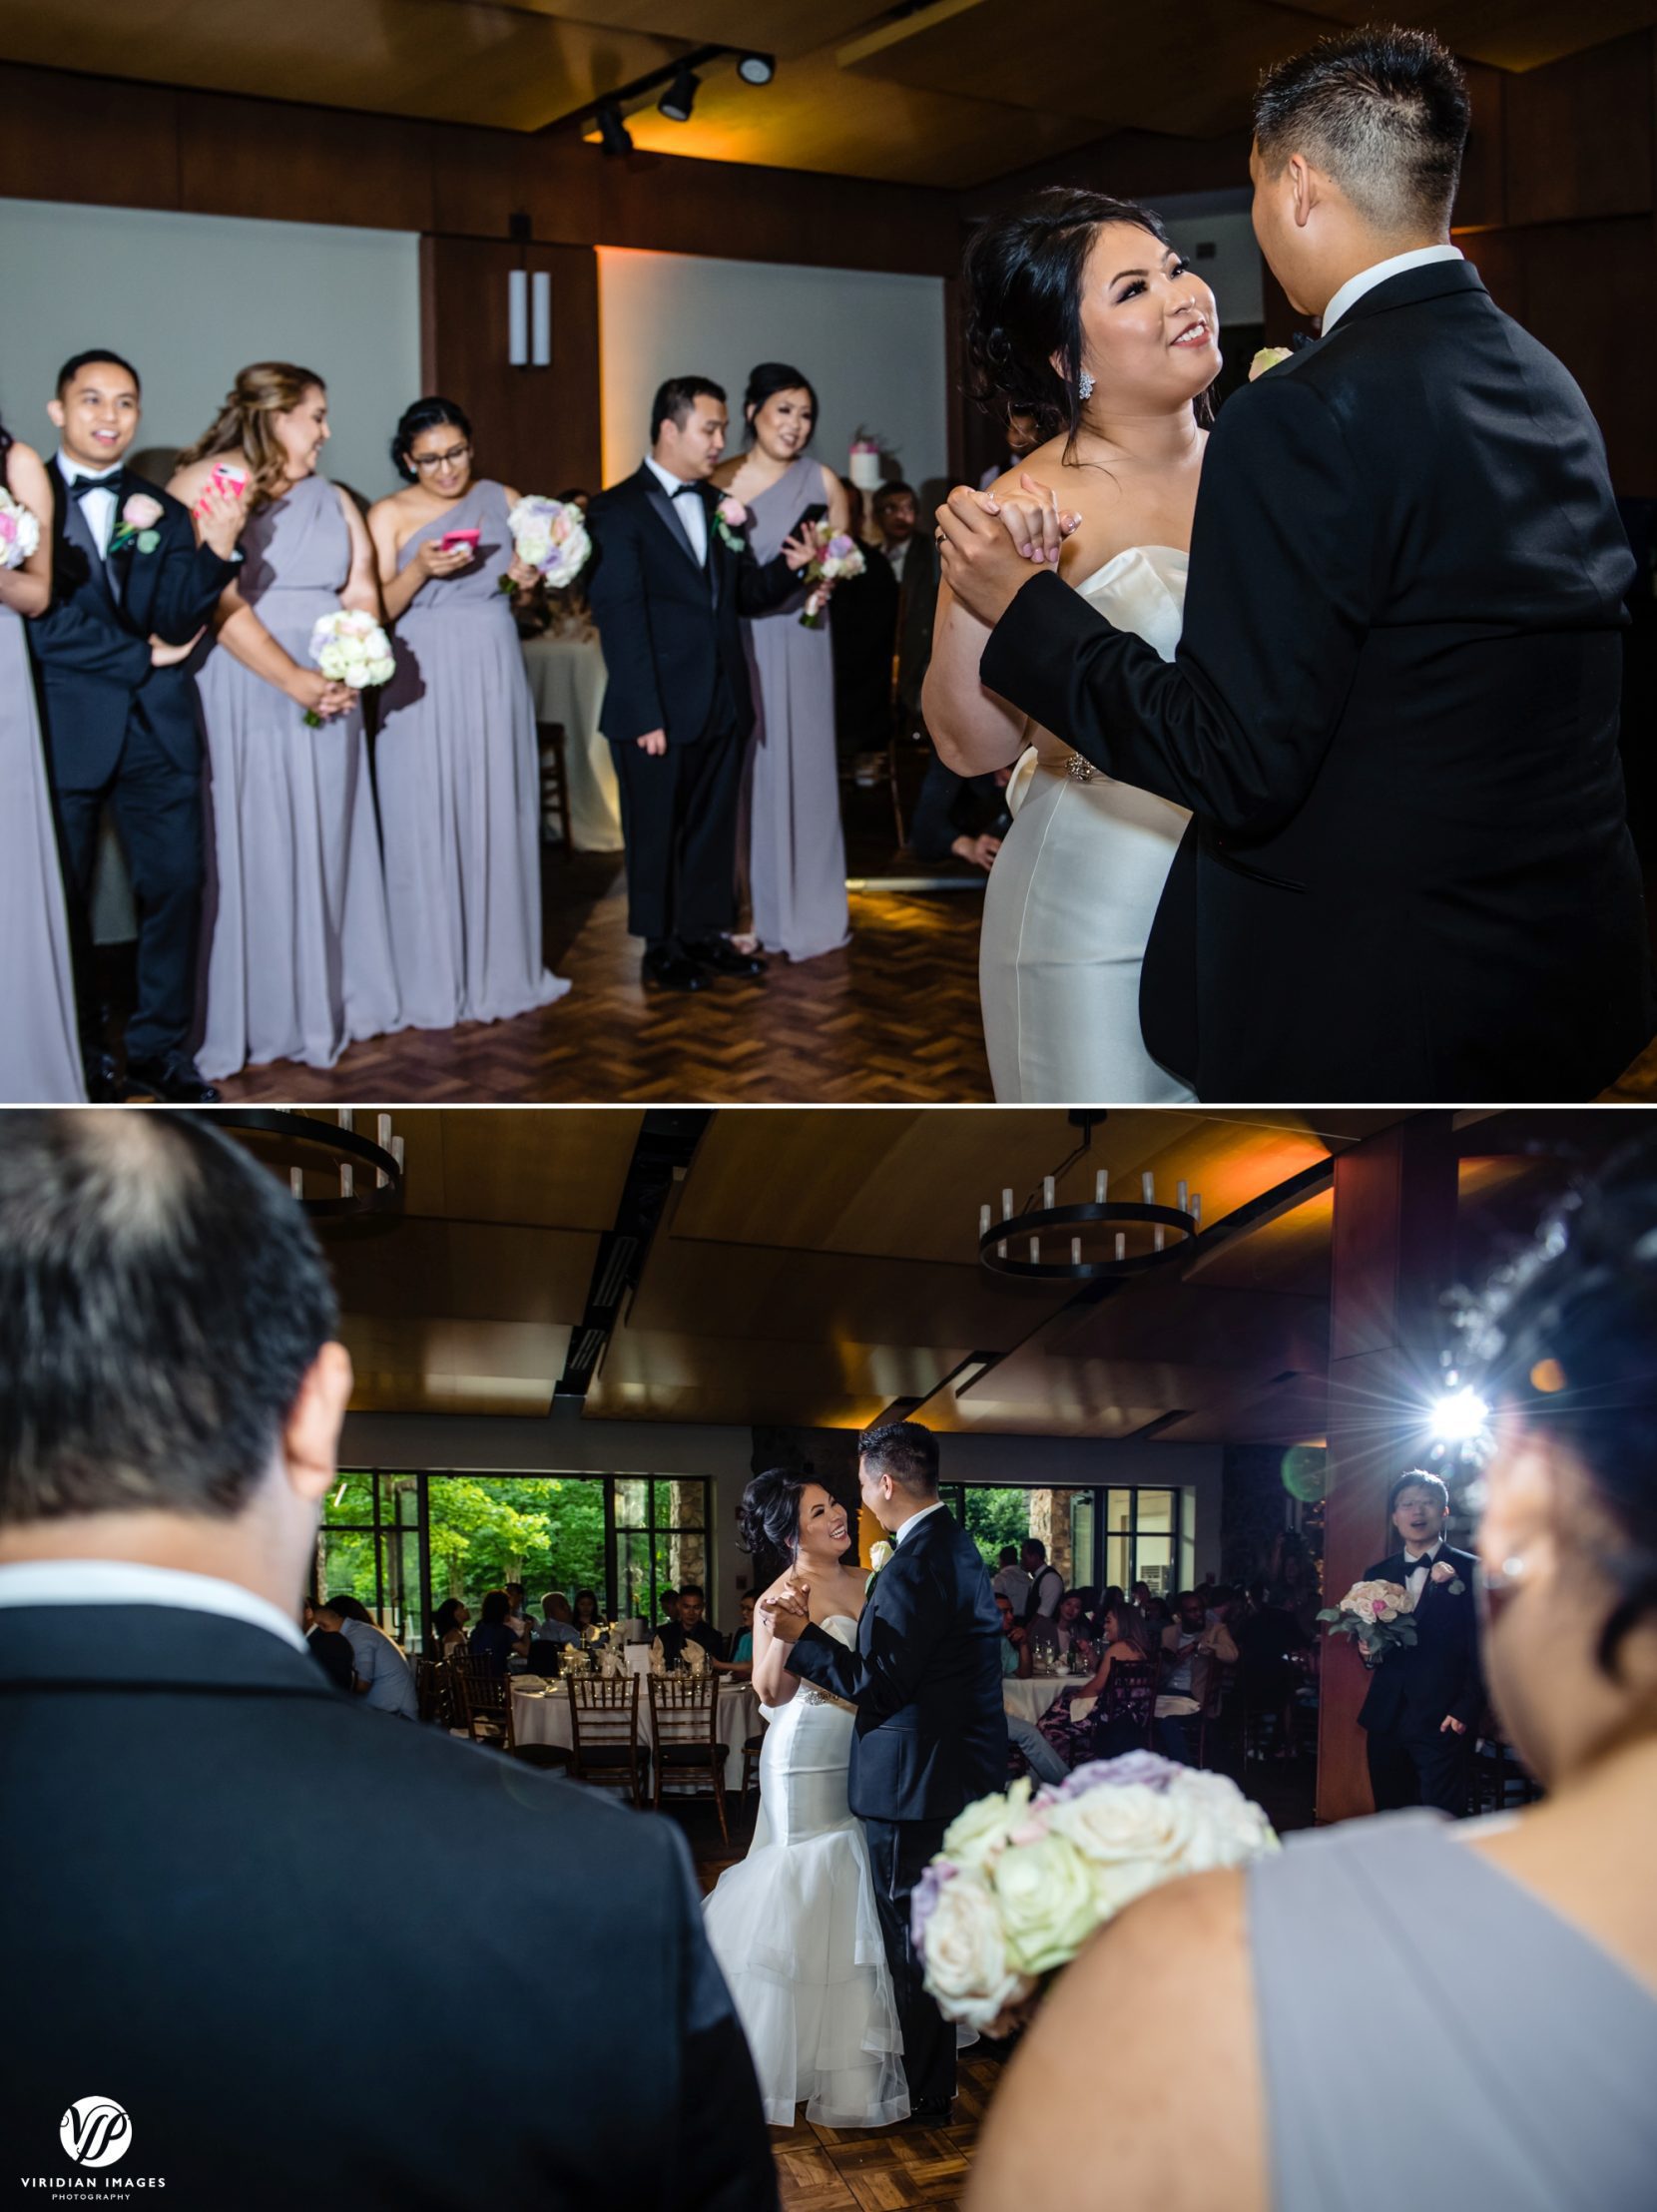 bridal party sing a cappella first dance song with bride and groom